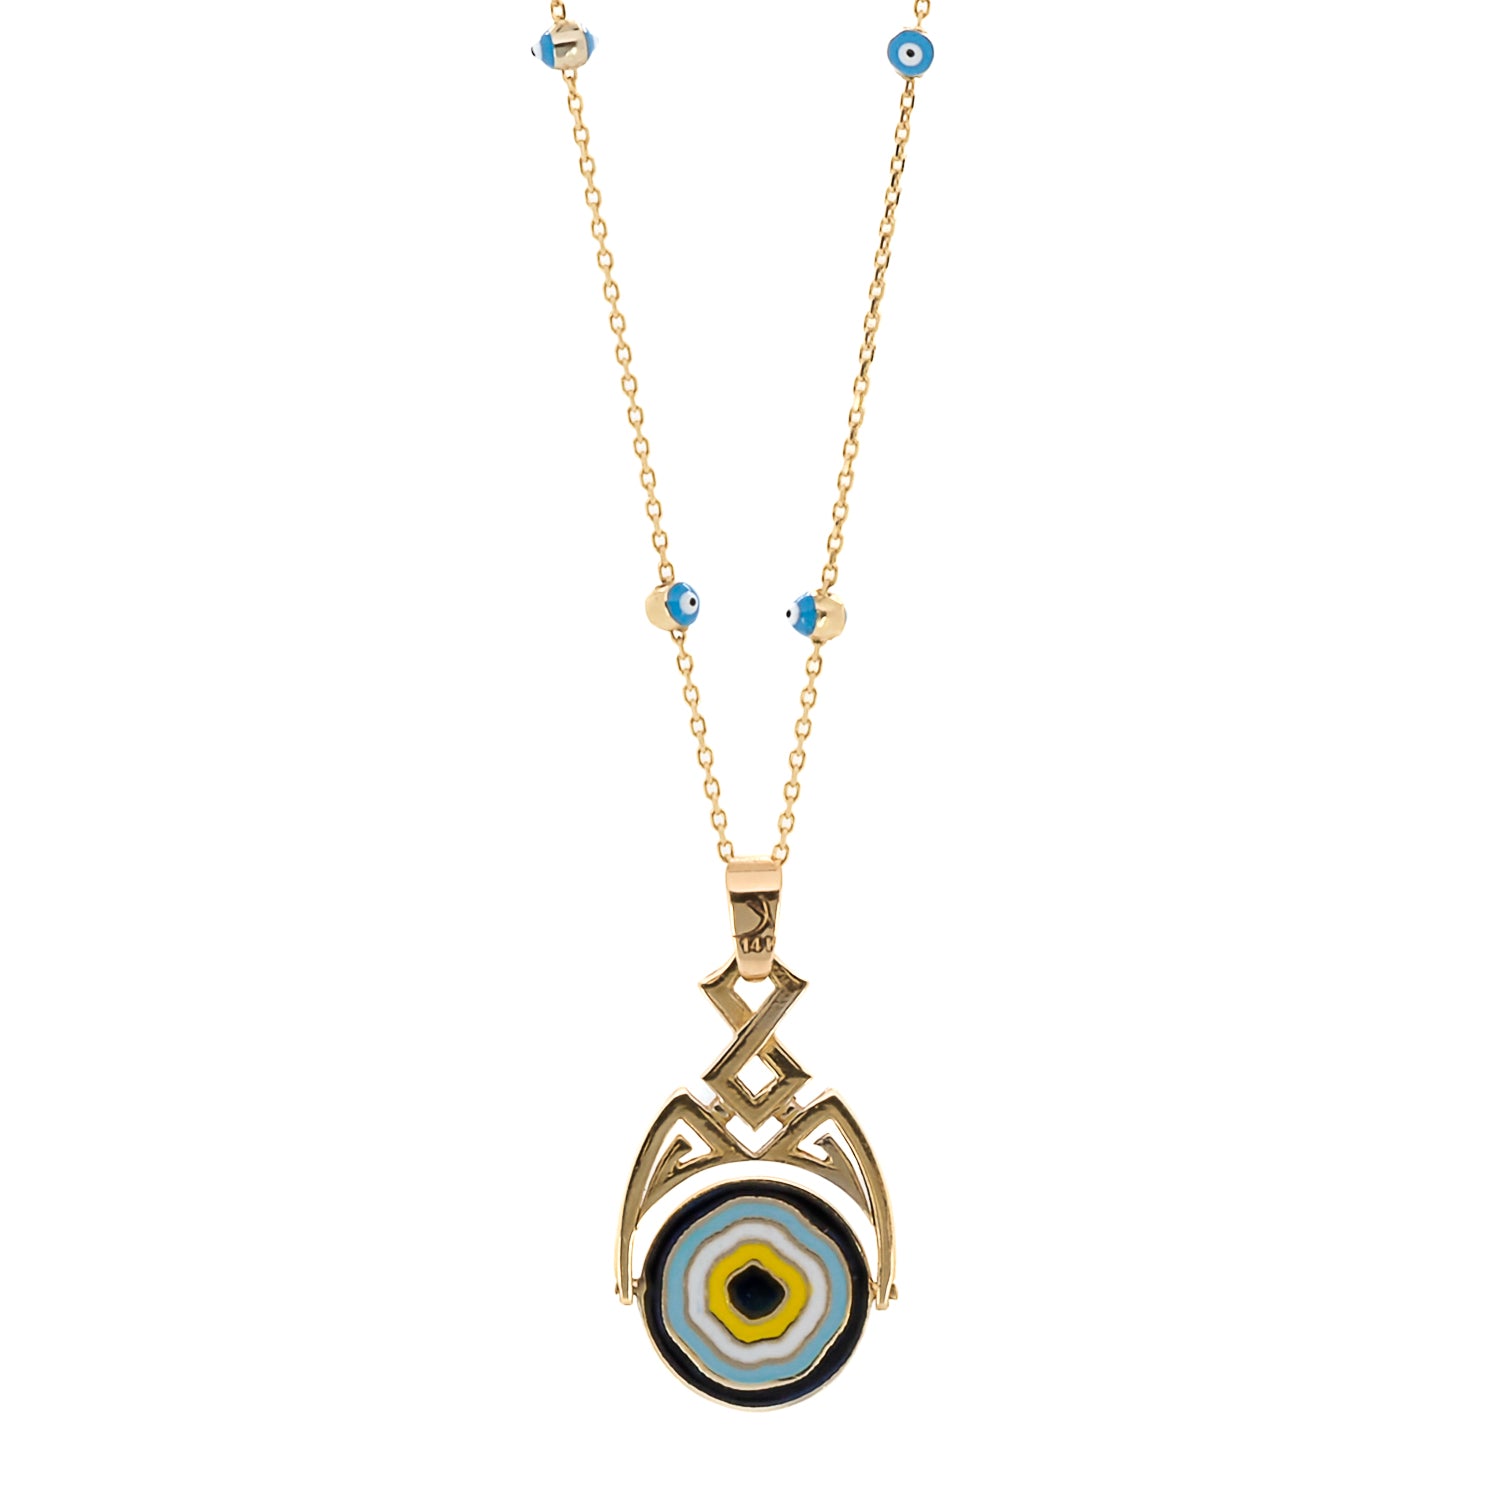 Gold and Diamond Lucky Evil Eye Necklace - Handmade 14k yellow gold necklace featuring a stunning pendant adorned with diamonds and blue and yellow enamel, symbolizing protection and good fortune.